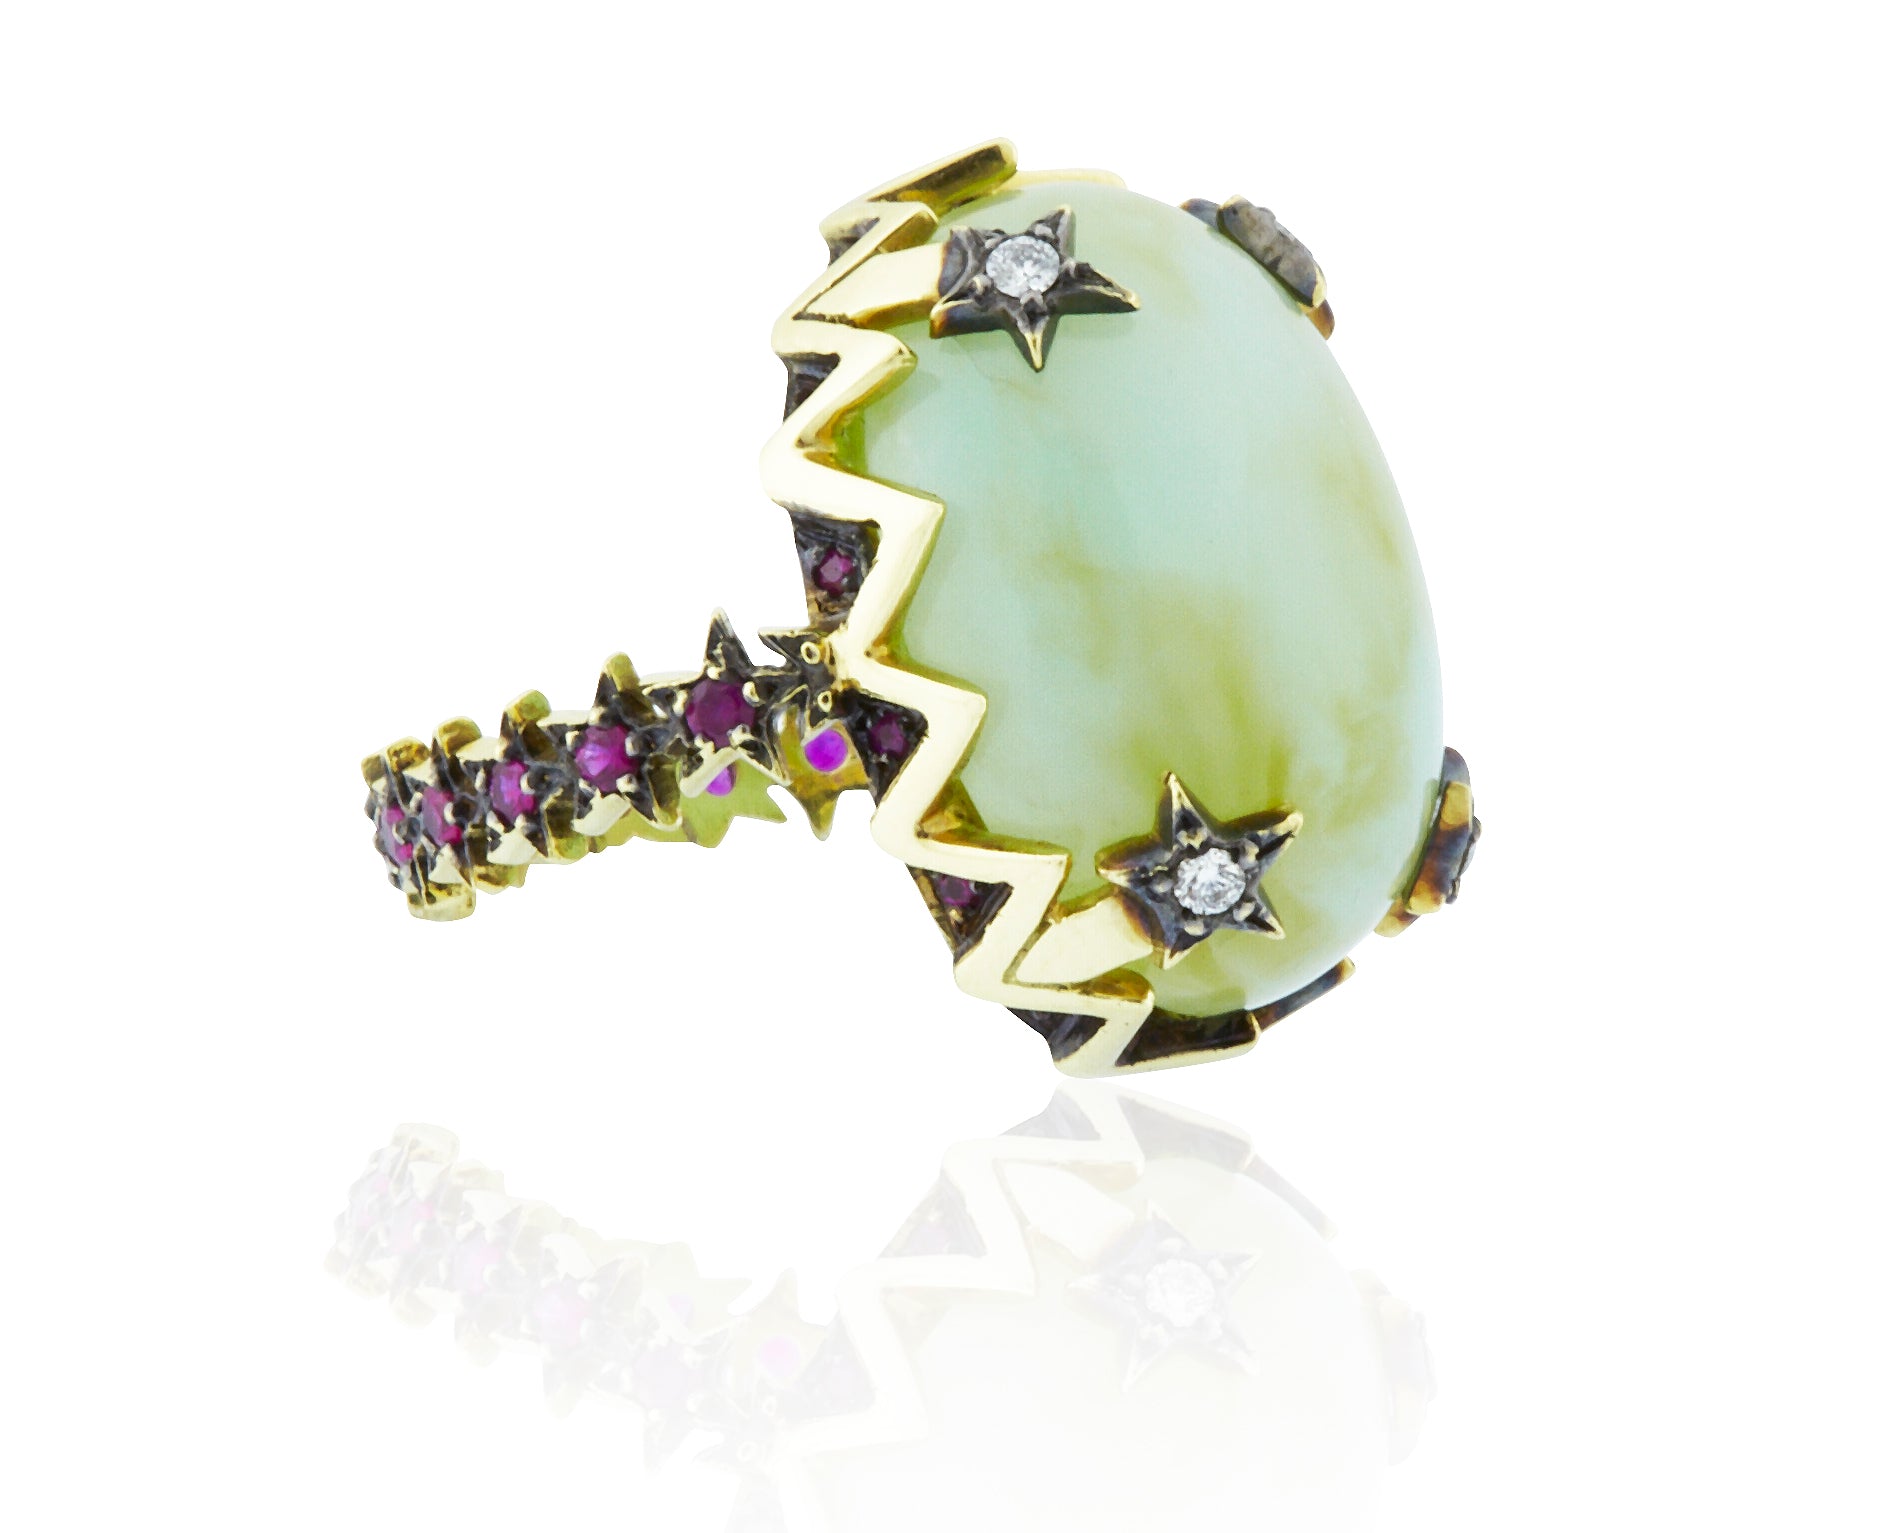 Cabochon Peruvian Opal & Ruby Cocktail Ring